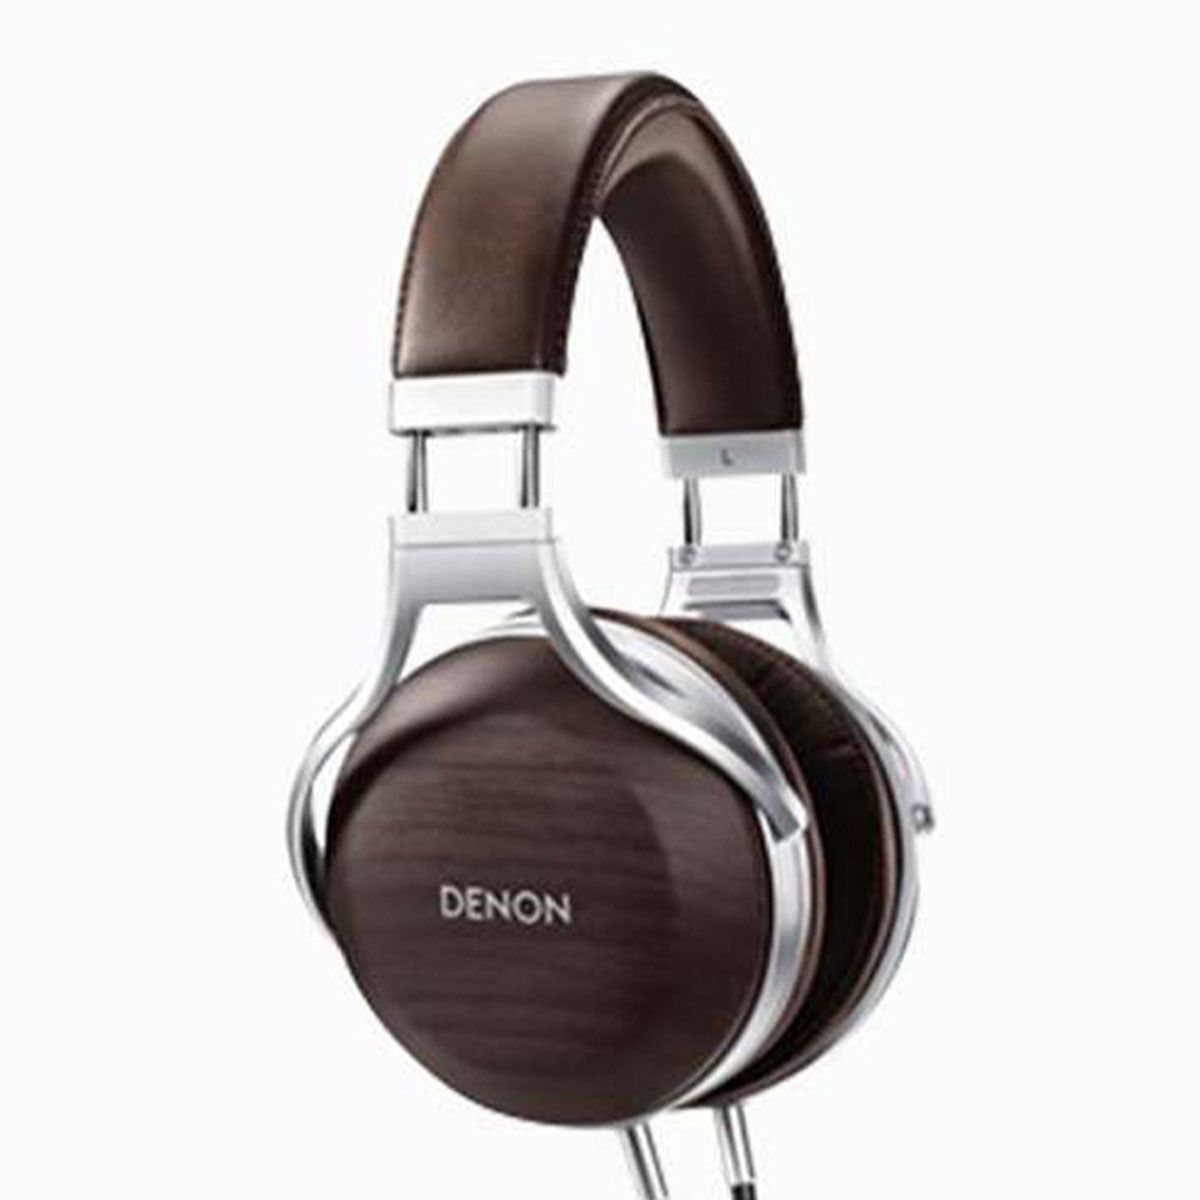 Close-up shot of the Denon AH-D5200 Closed-Back Headphone side view.